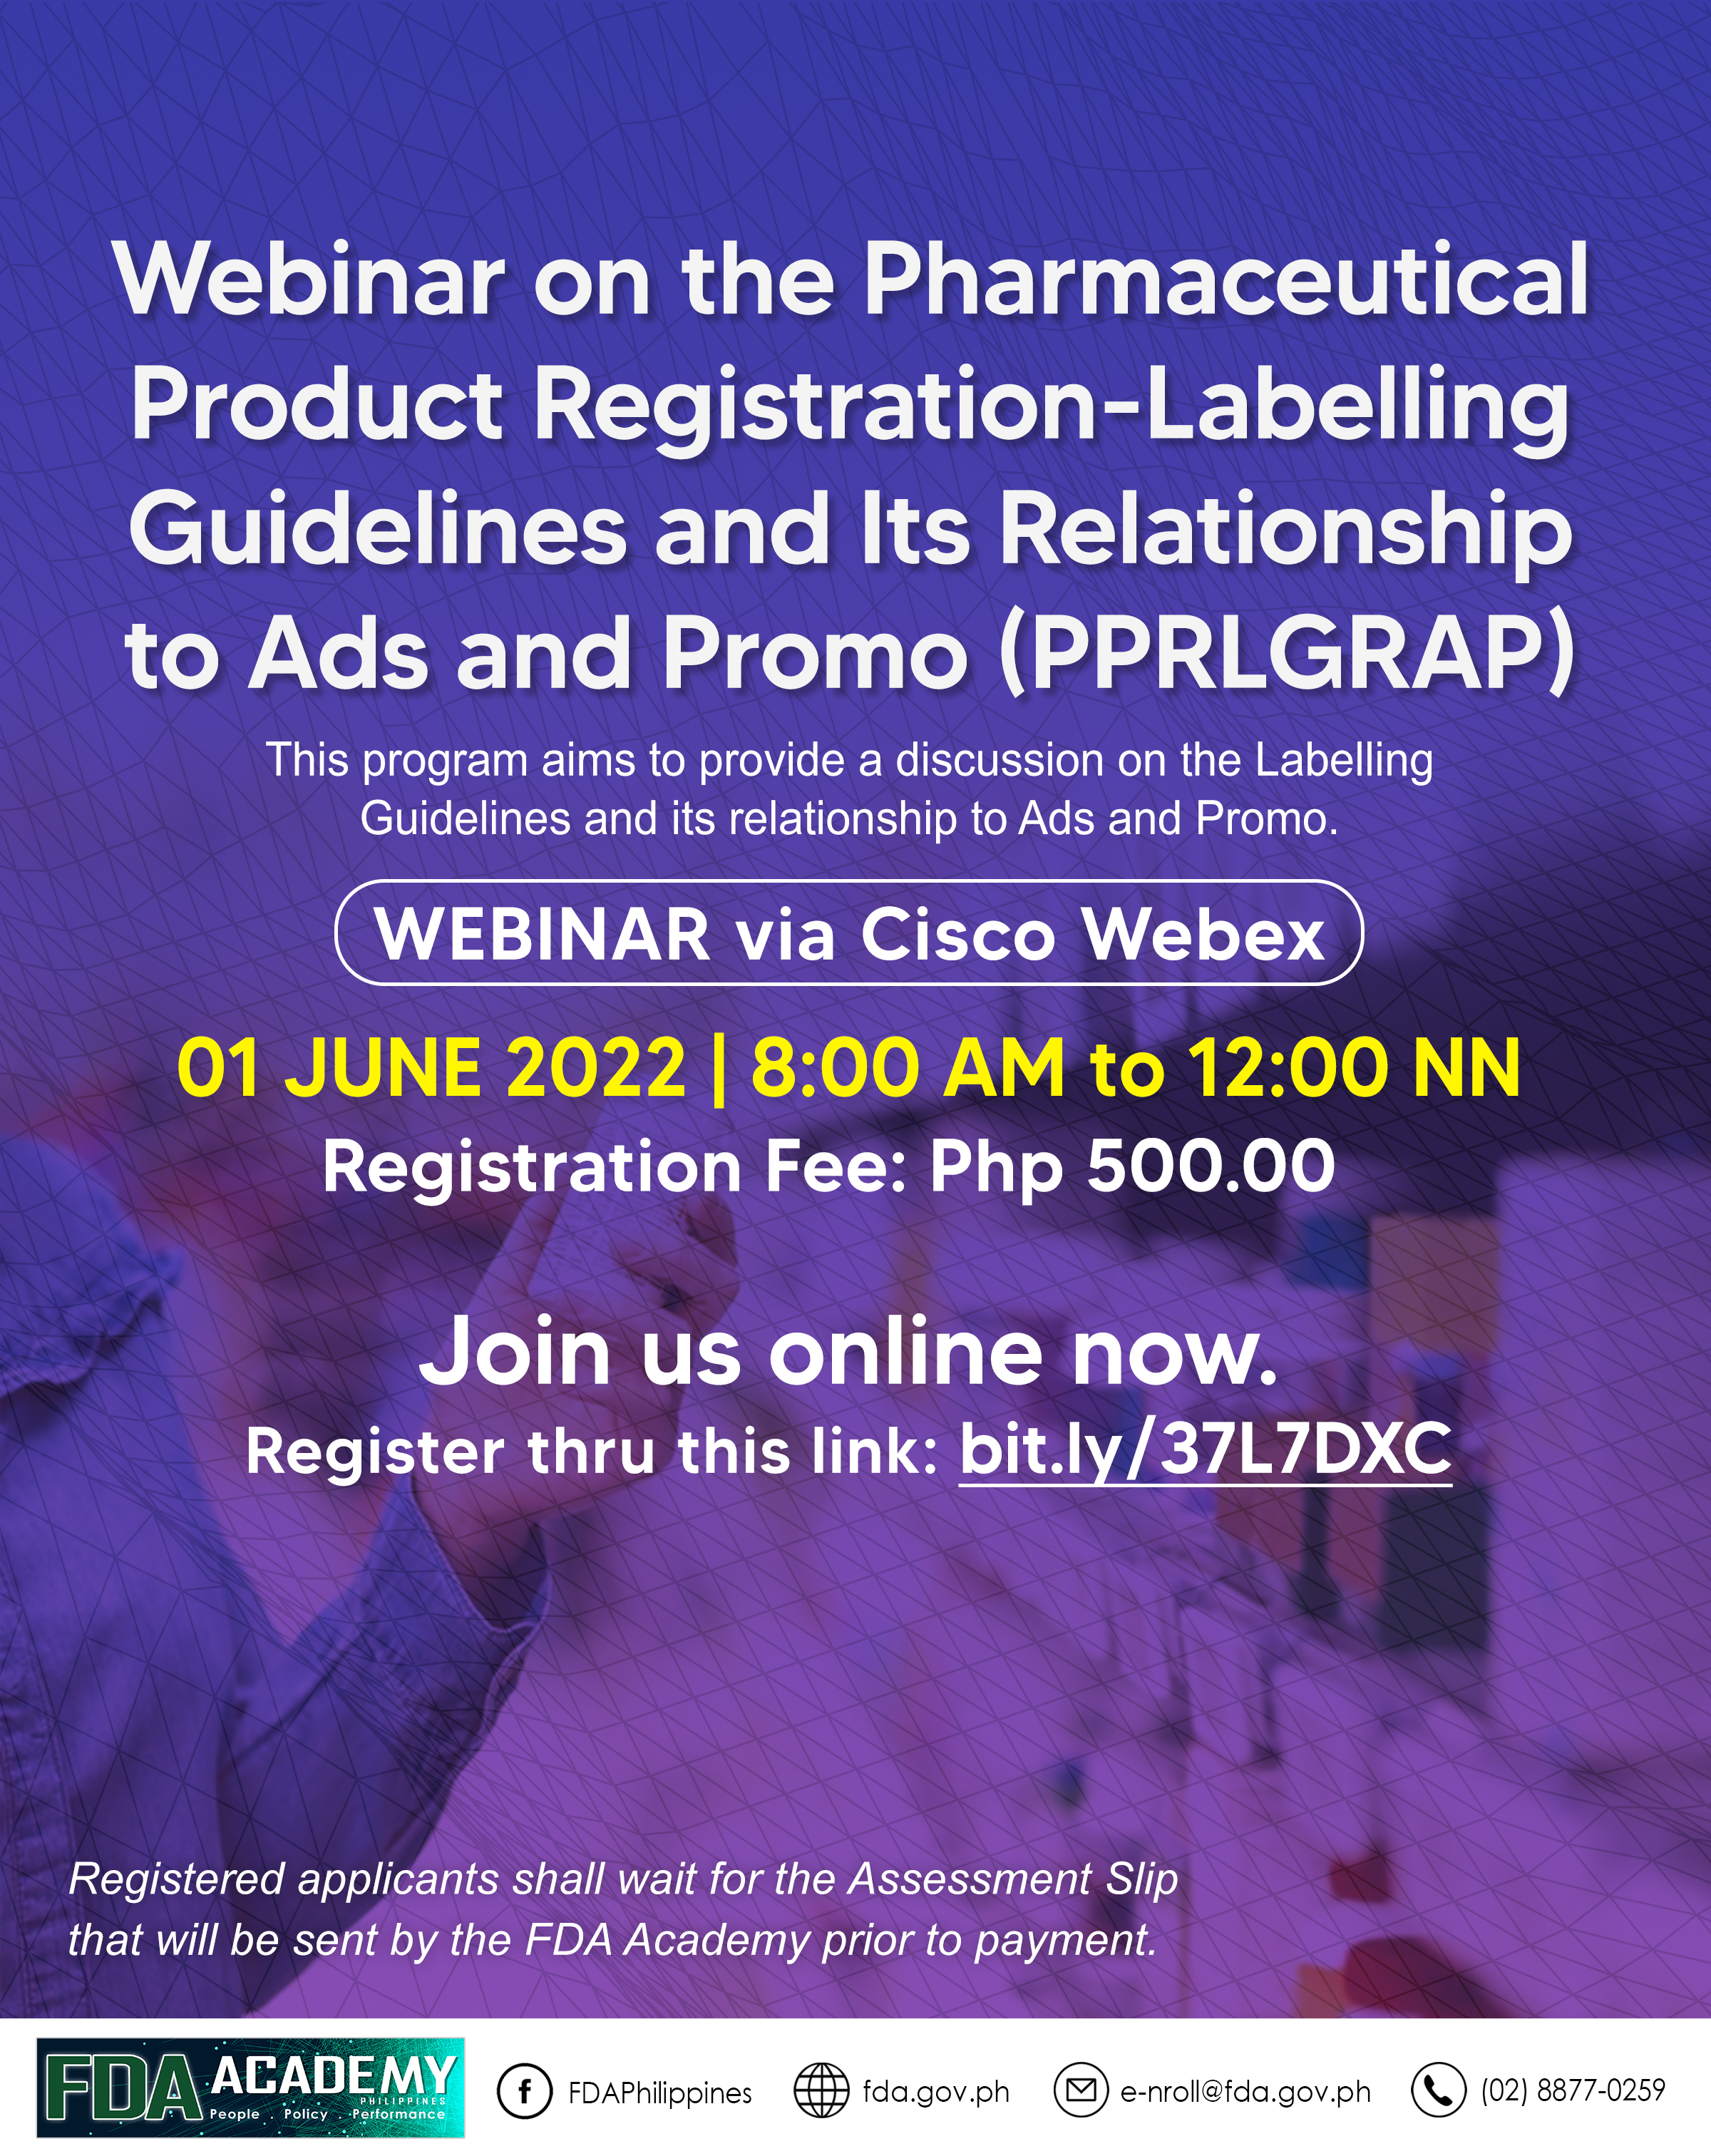 Announcement || WEBINAR ON PHARMACEUTICAL PRODUCT REGISTRATION – LABELLING GUIDELINES AND ITS RELATIONSHIP IN ADS AND PROMO (PPRLGRAP)